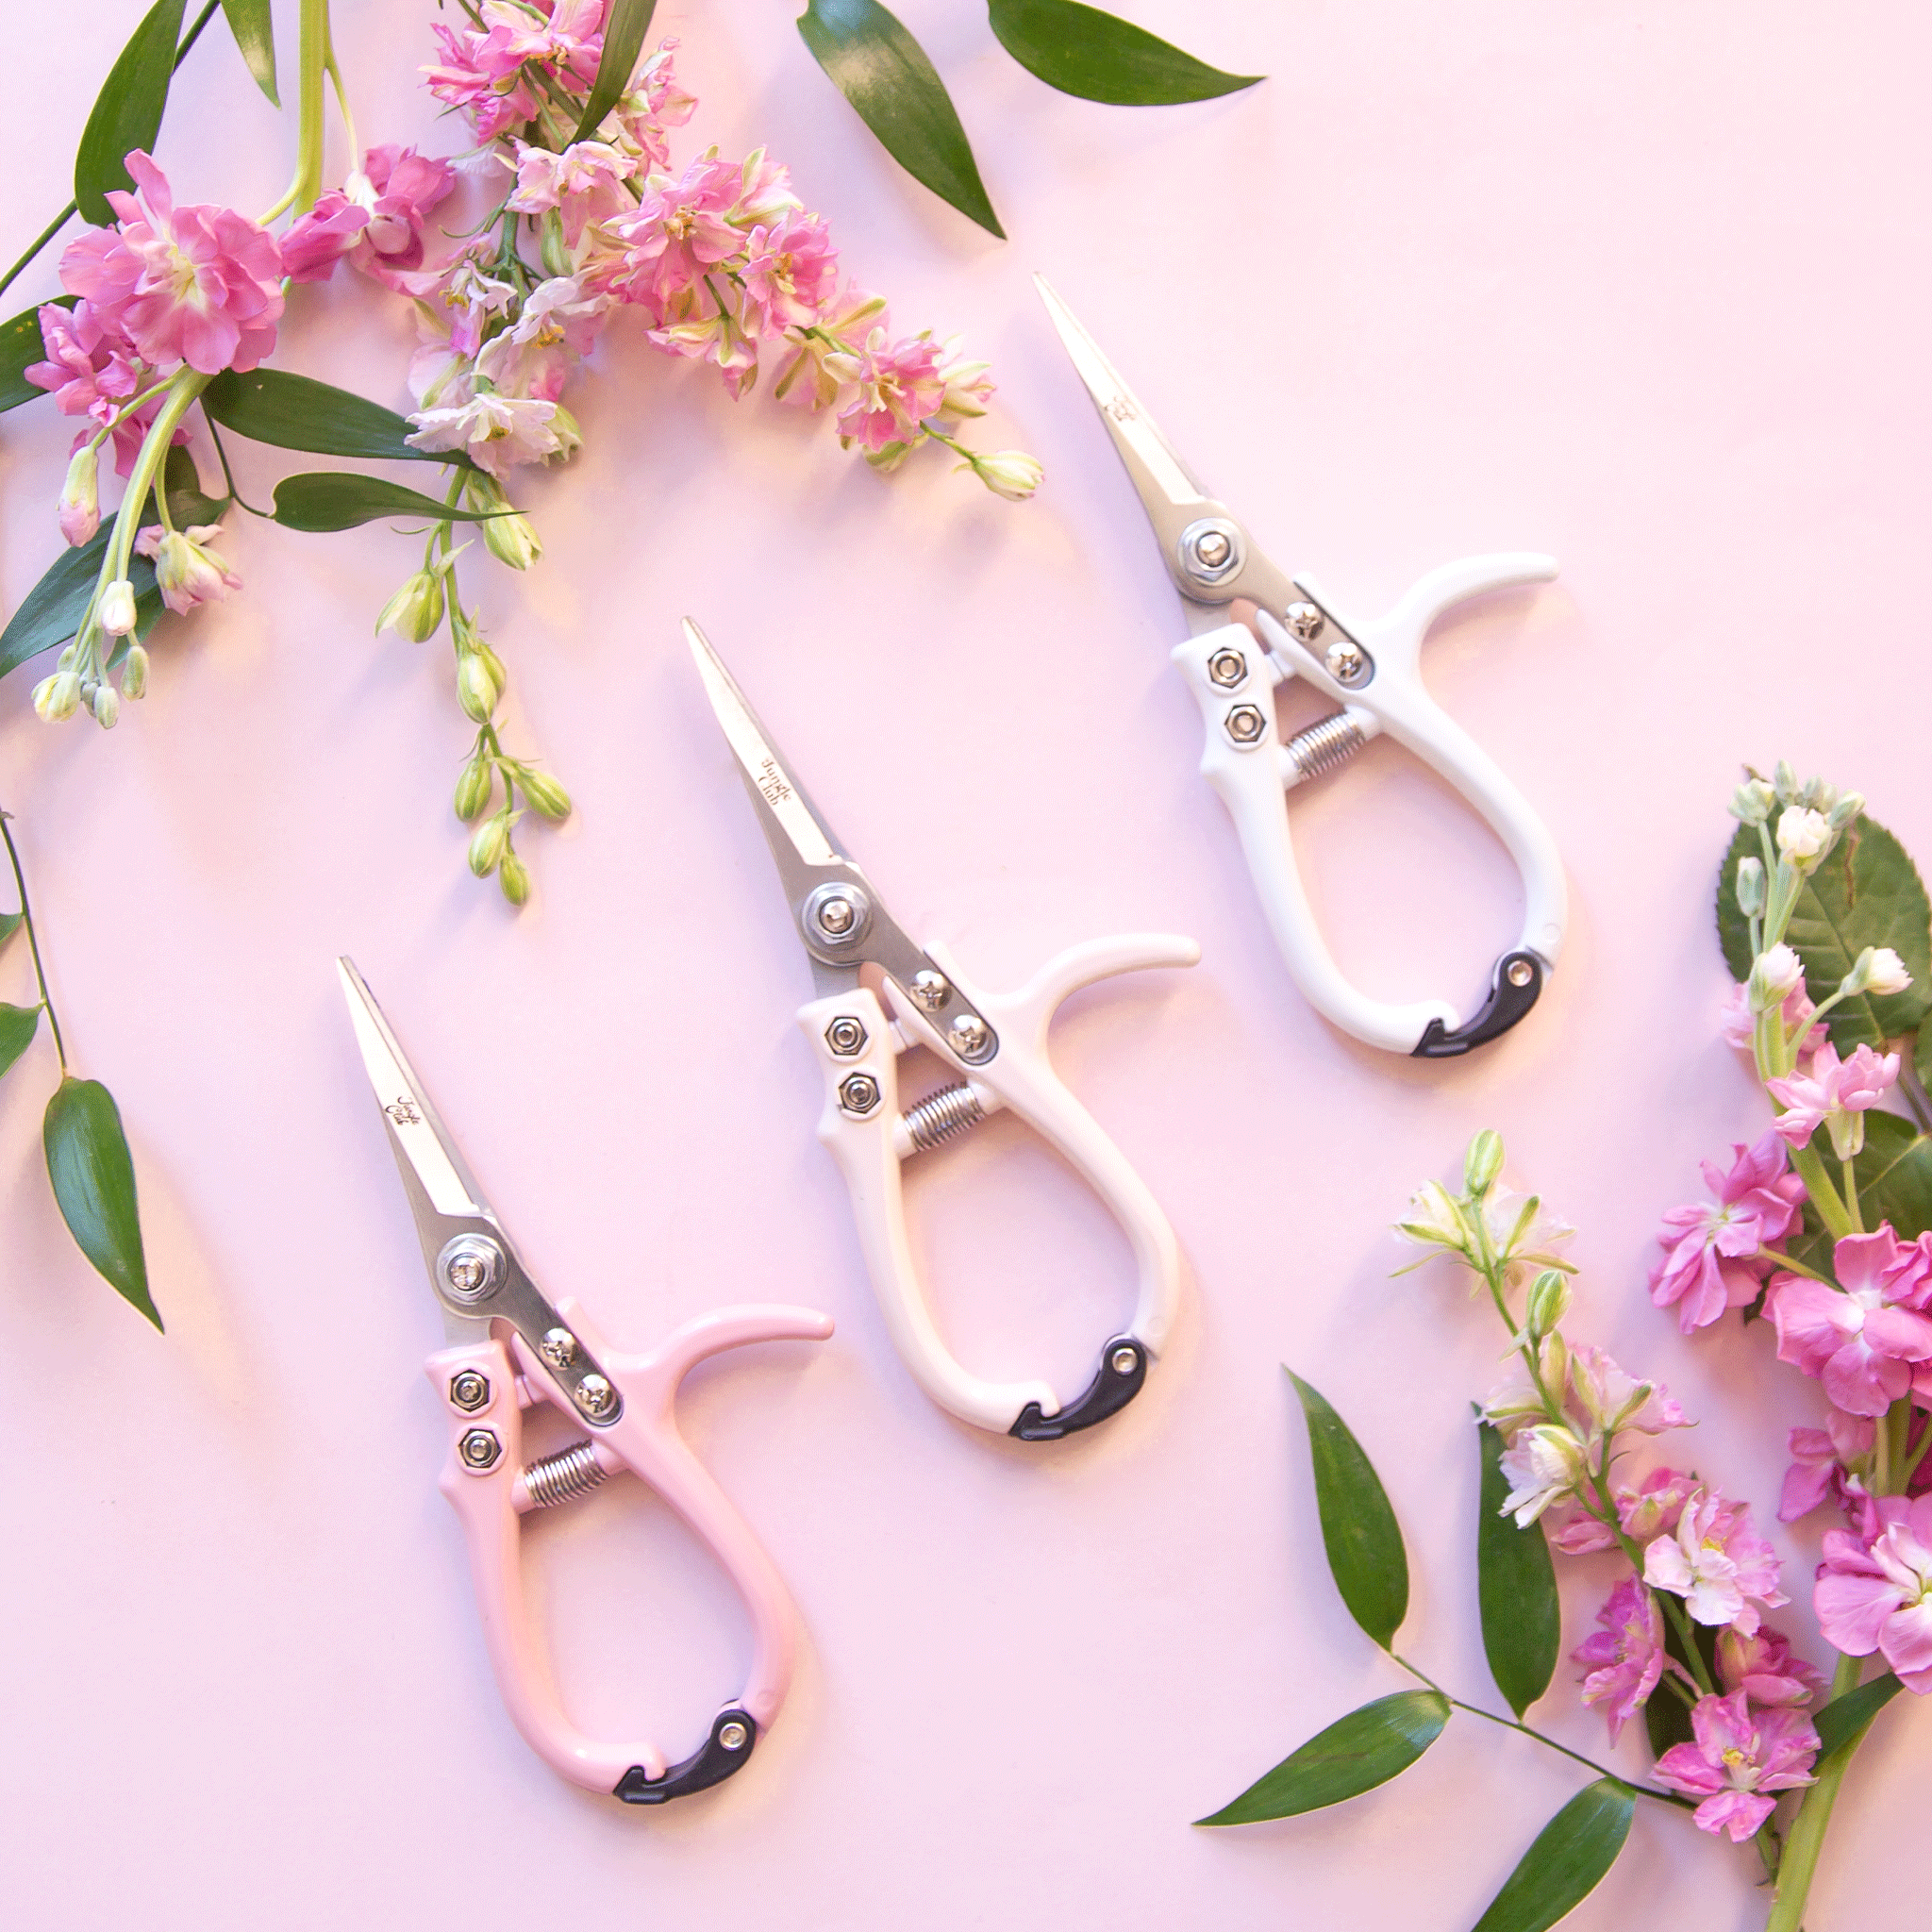 The easiest way to cut the lace off! Use “pinking” shears (I know